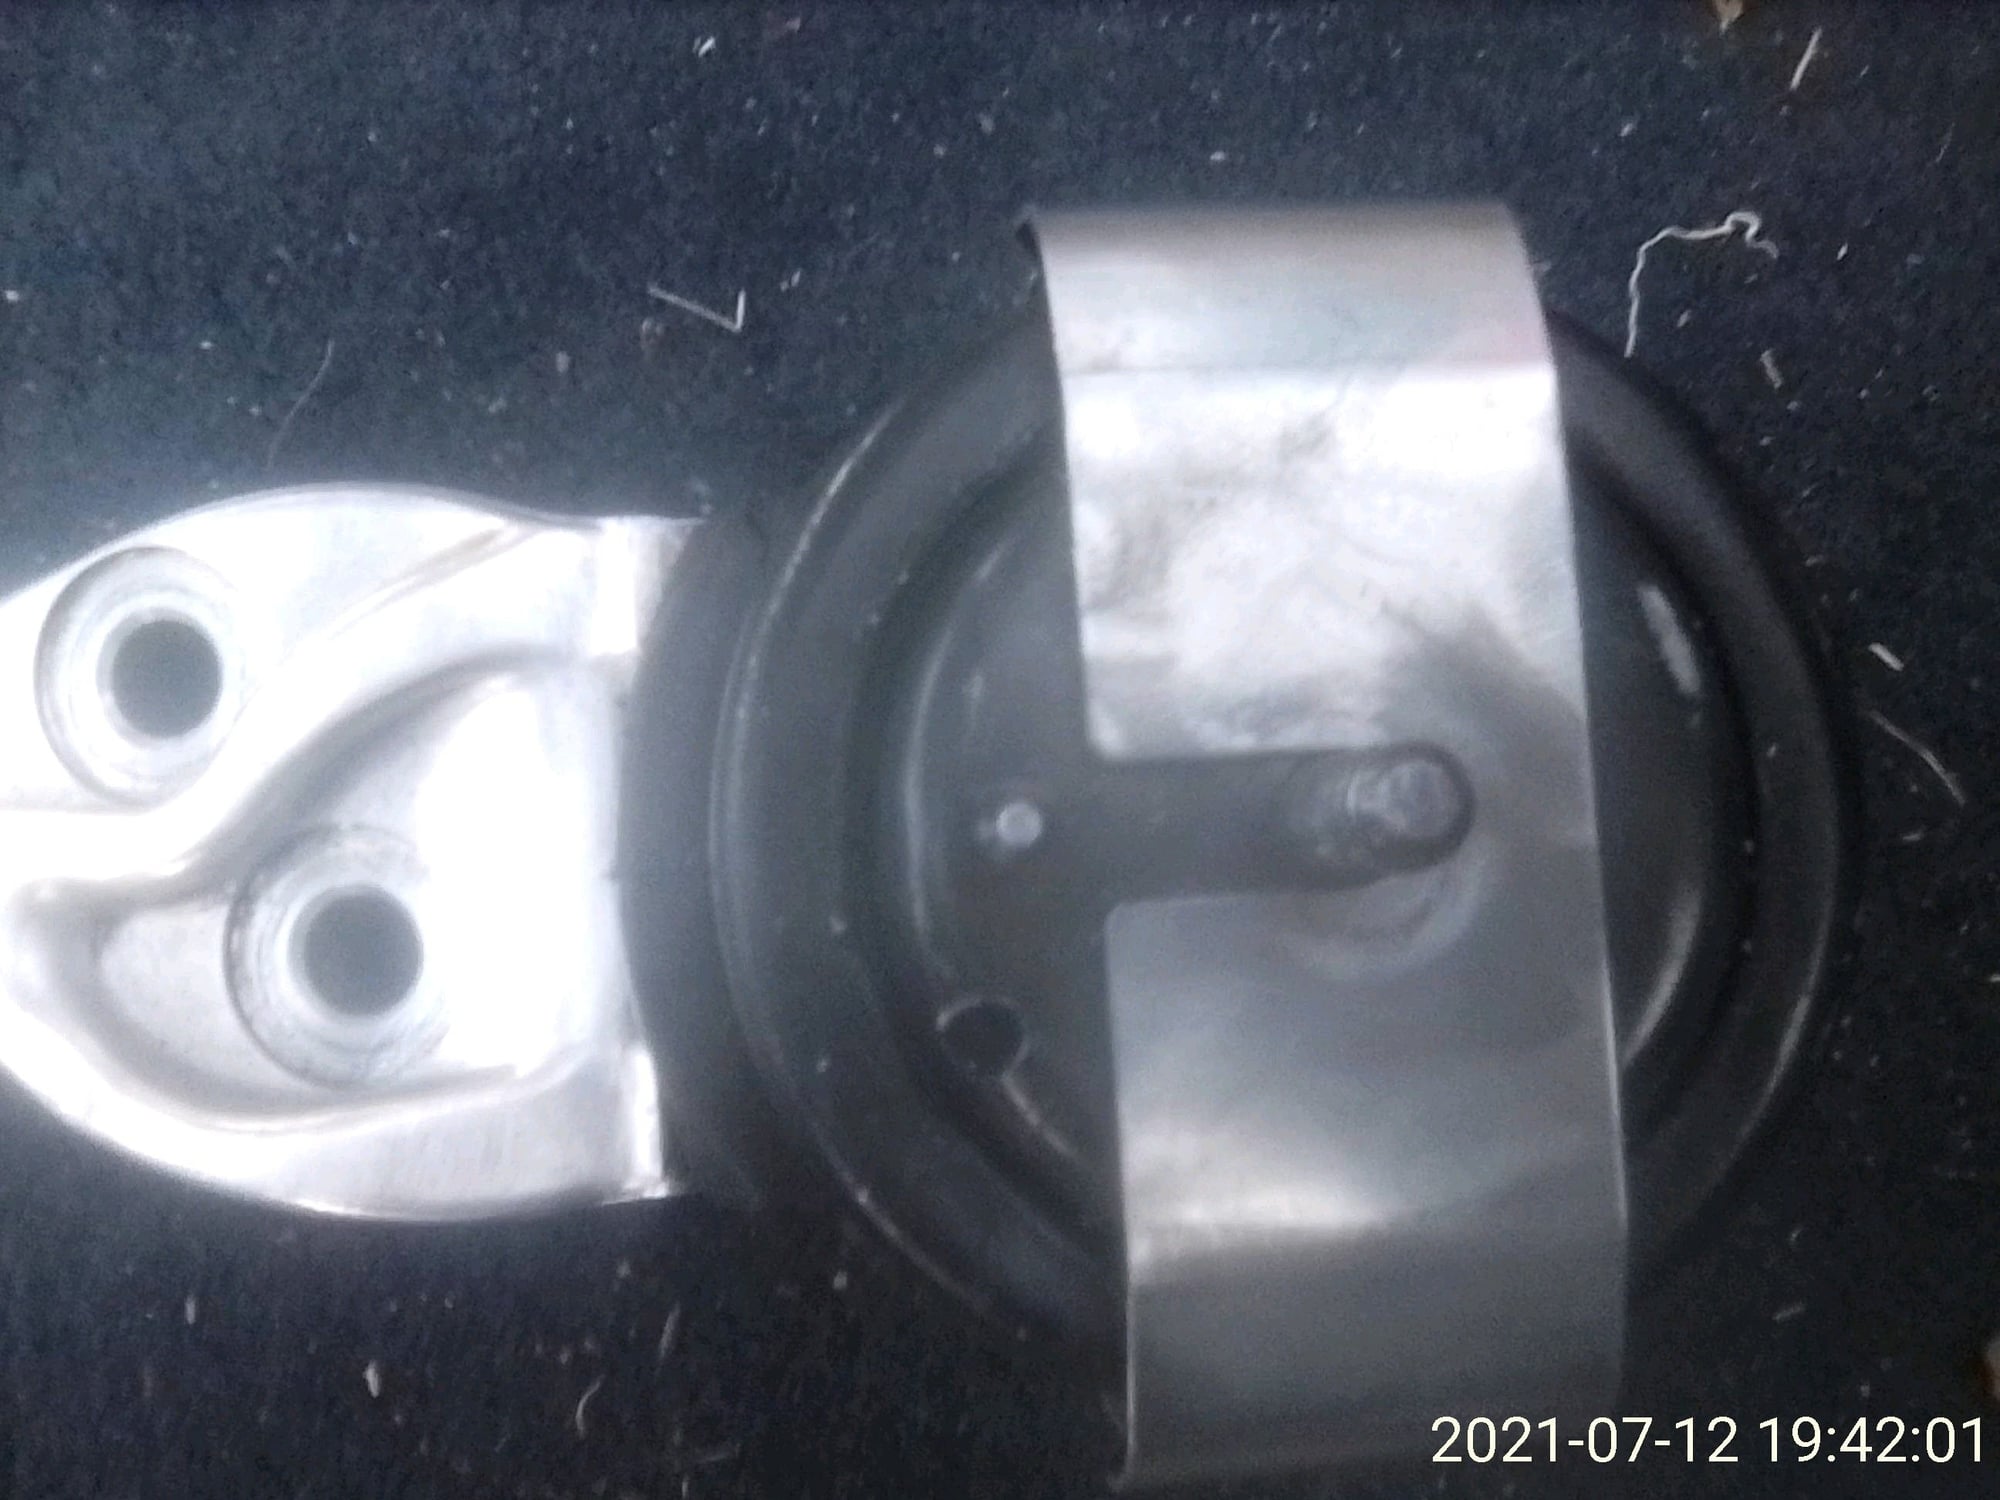 Miscellaneous - FD - OEM L & R Motor Mounts - Used - 1993 to 1995 Mazda RX-7 - San Jose, CA 95121, United States